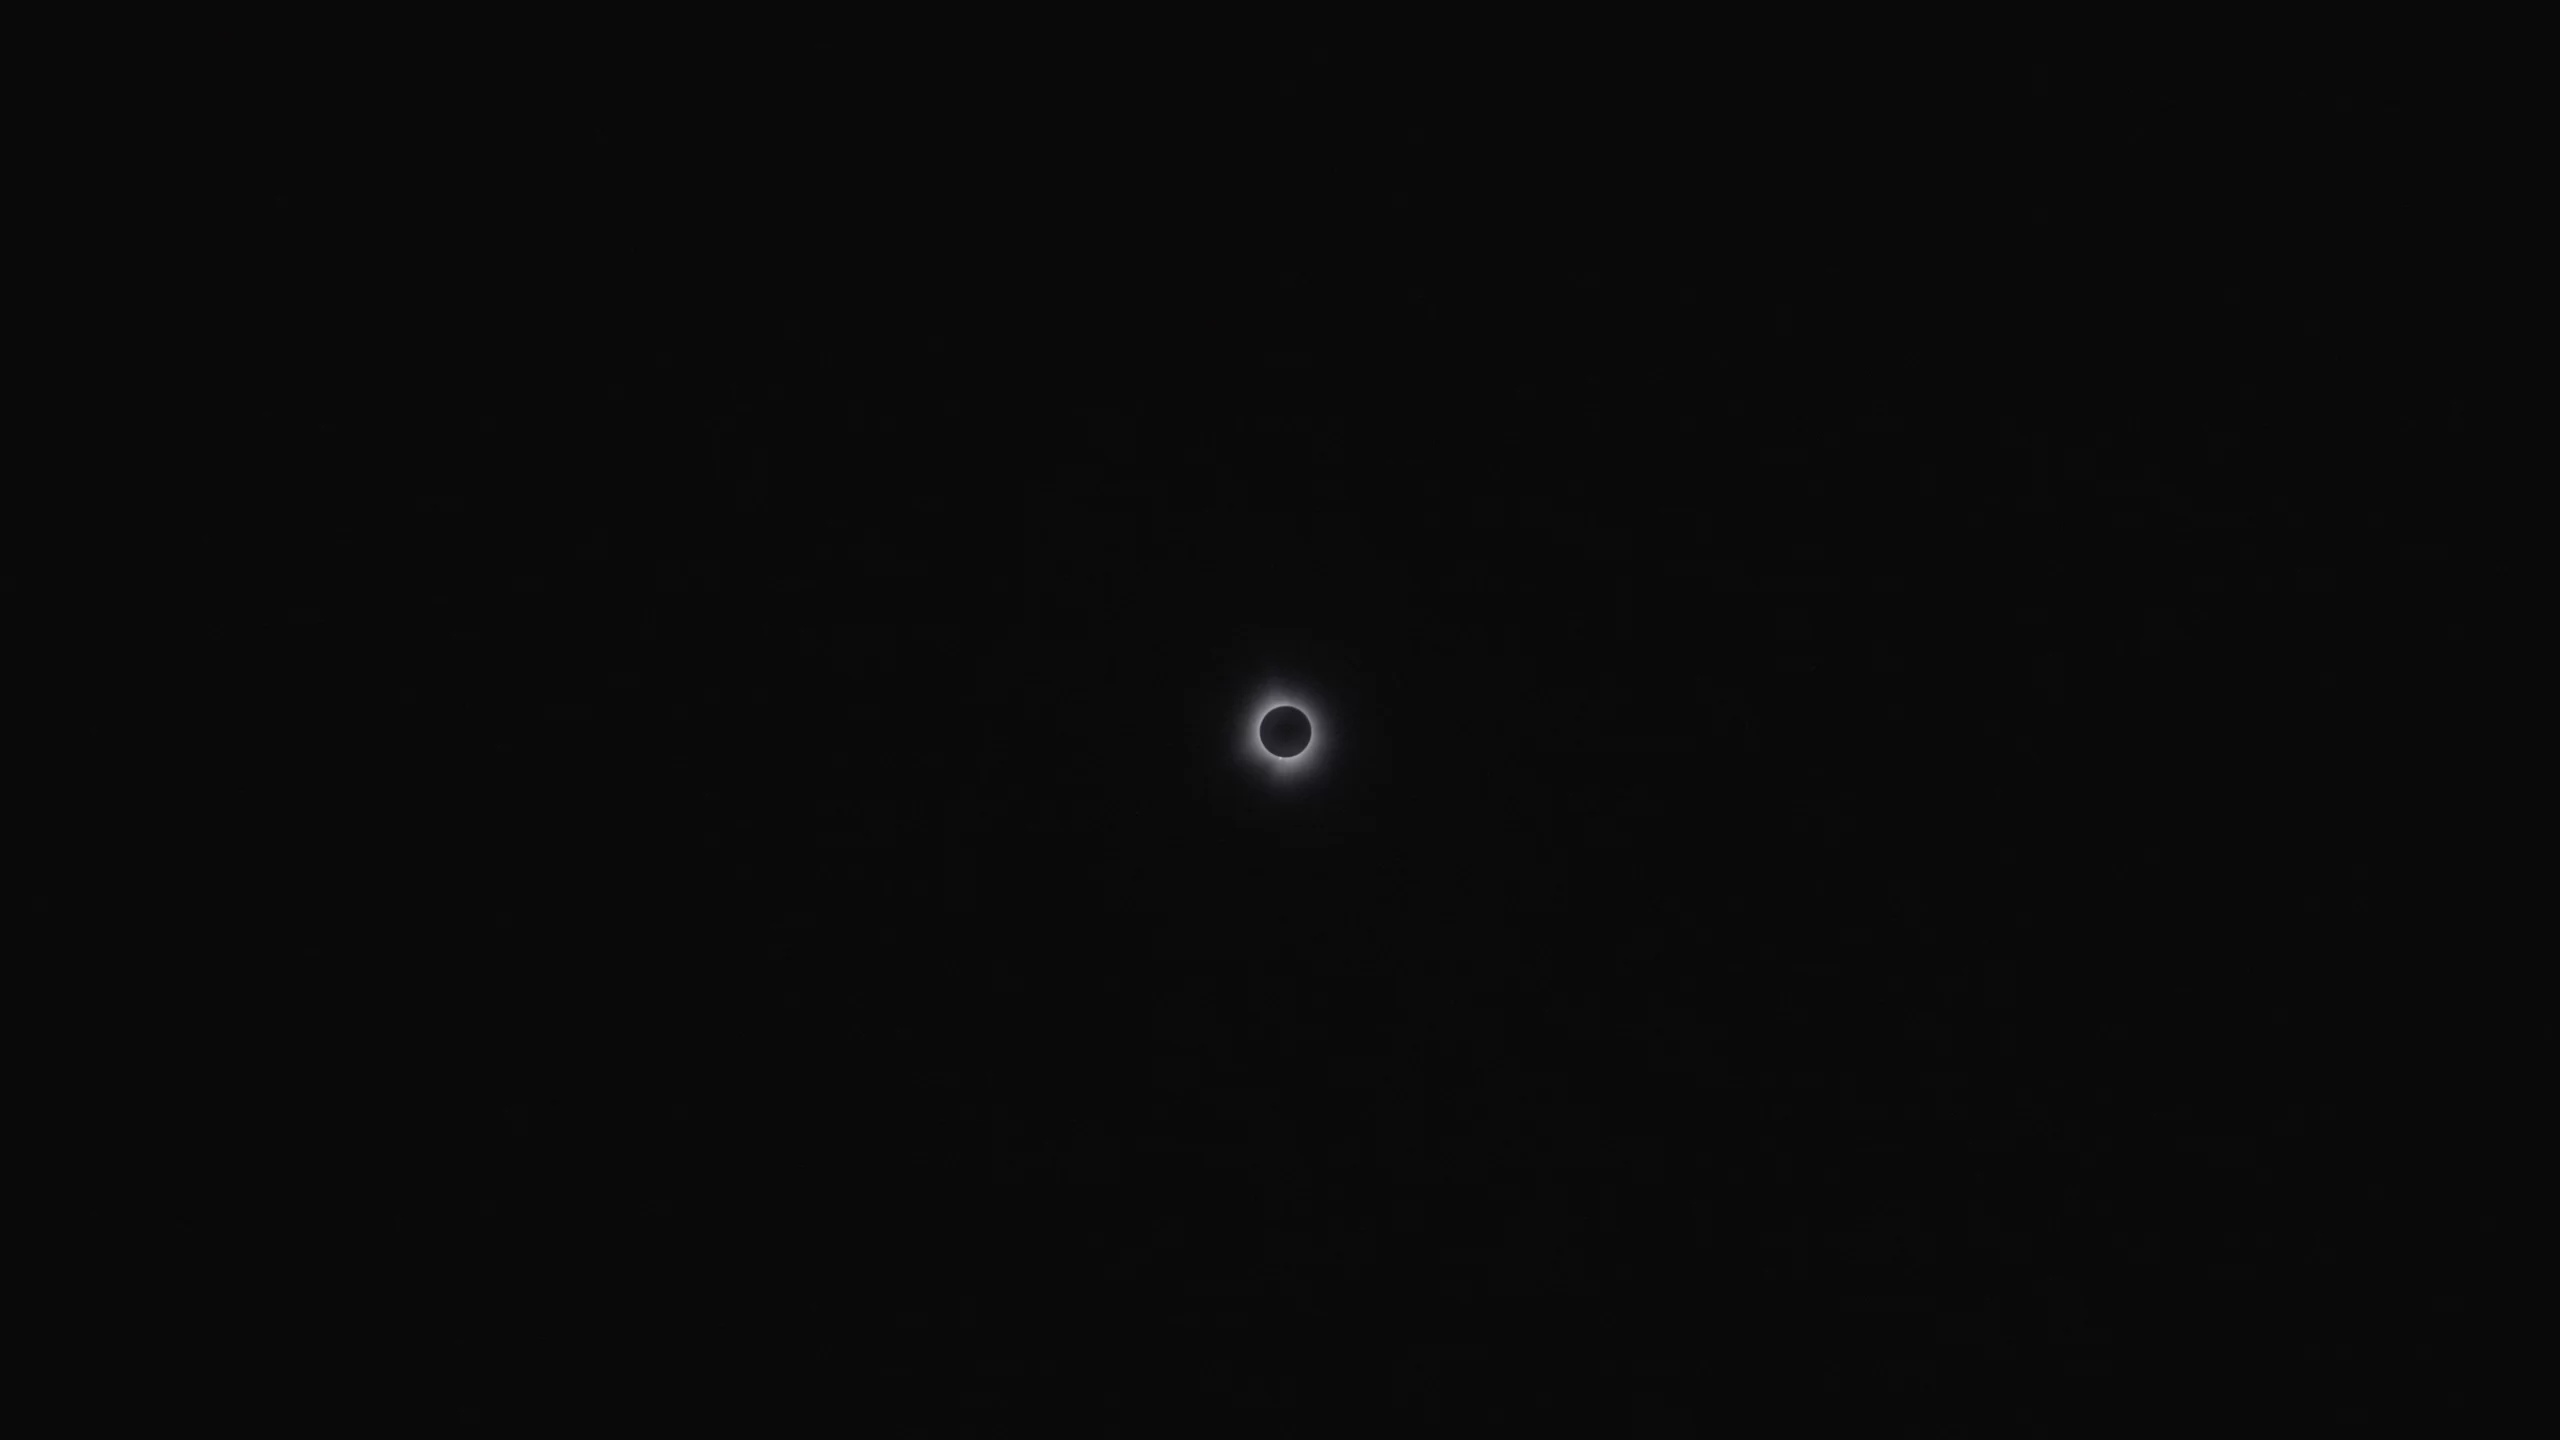 a picture of the 2024 eclipse with a black background, black center, and white corona around the sun and moon